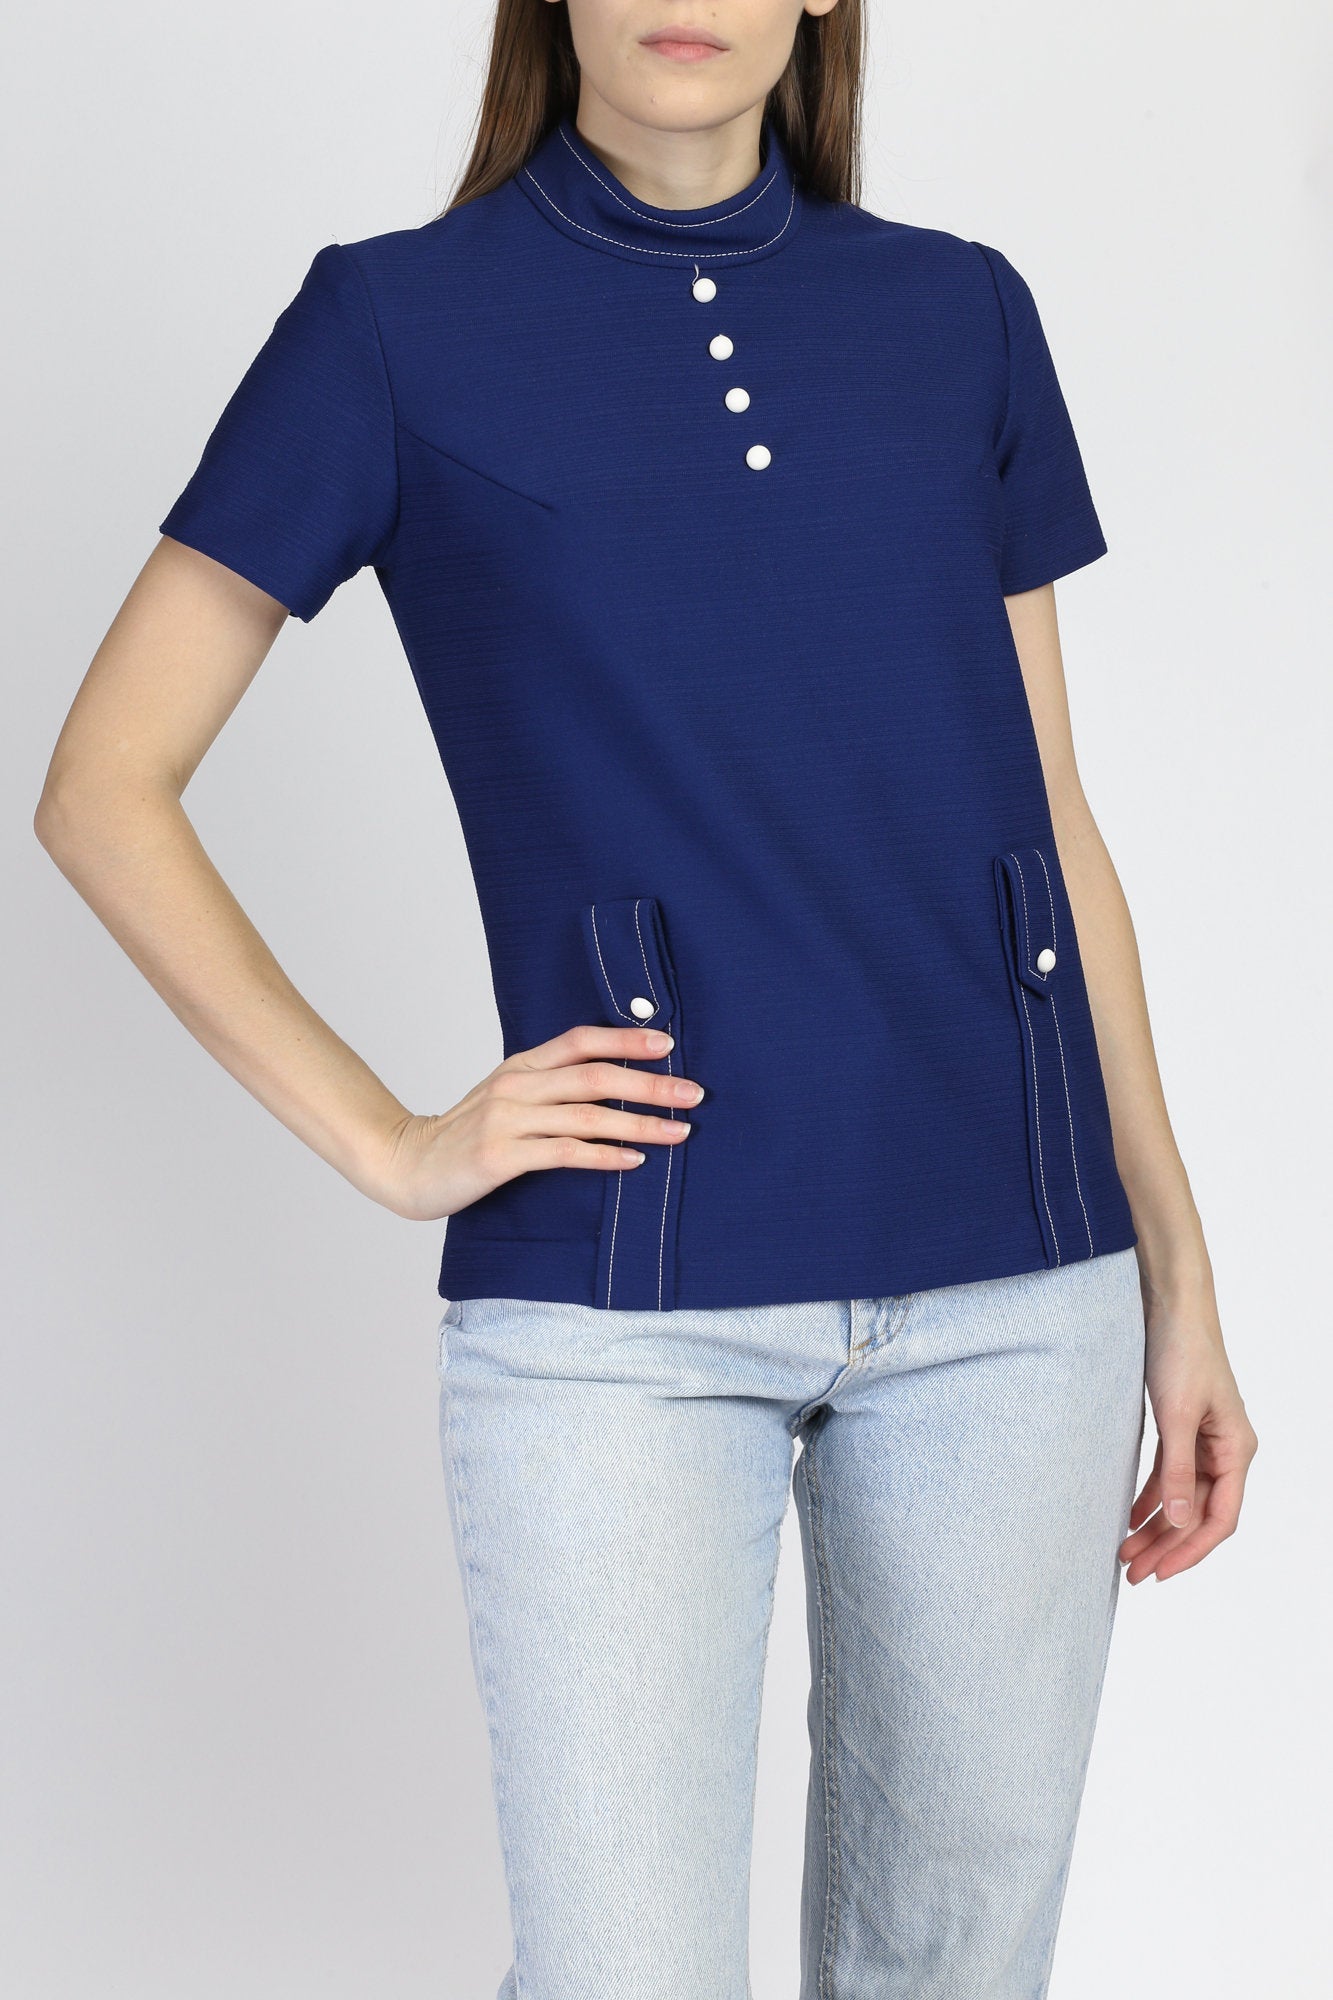 70s Mod Navy Blue Top - Small